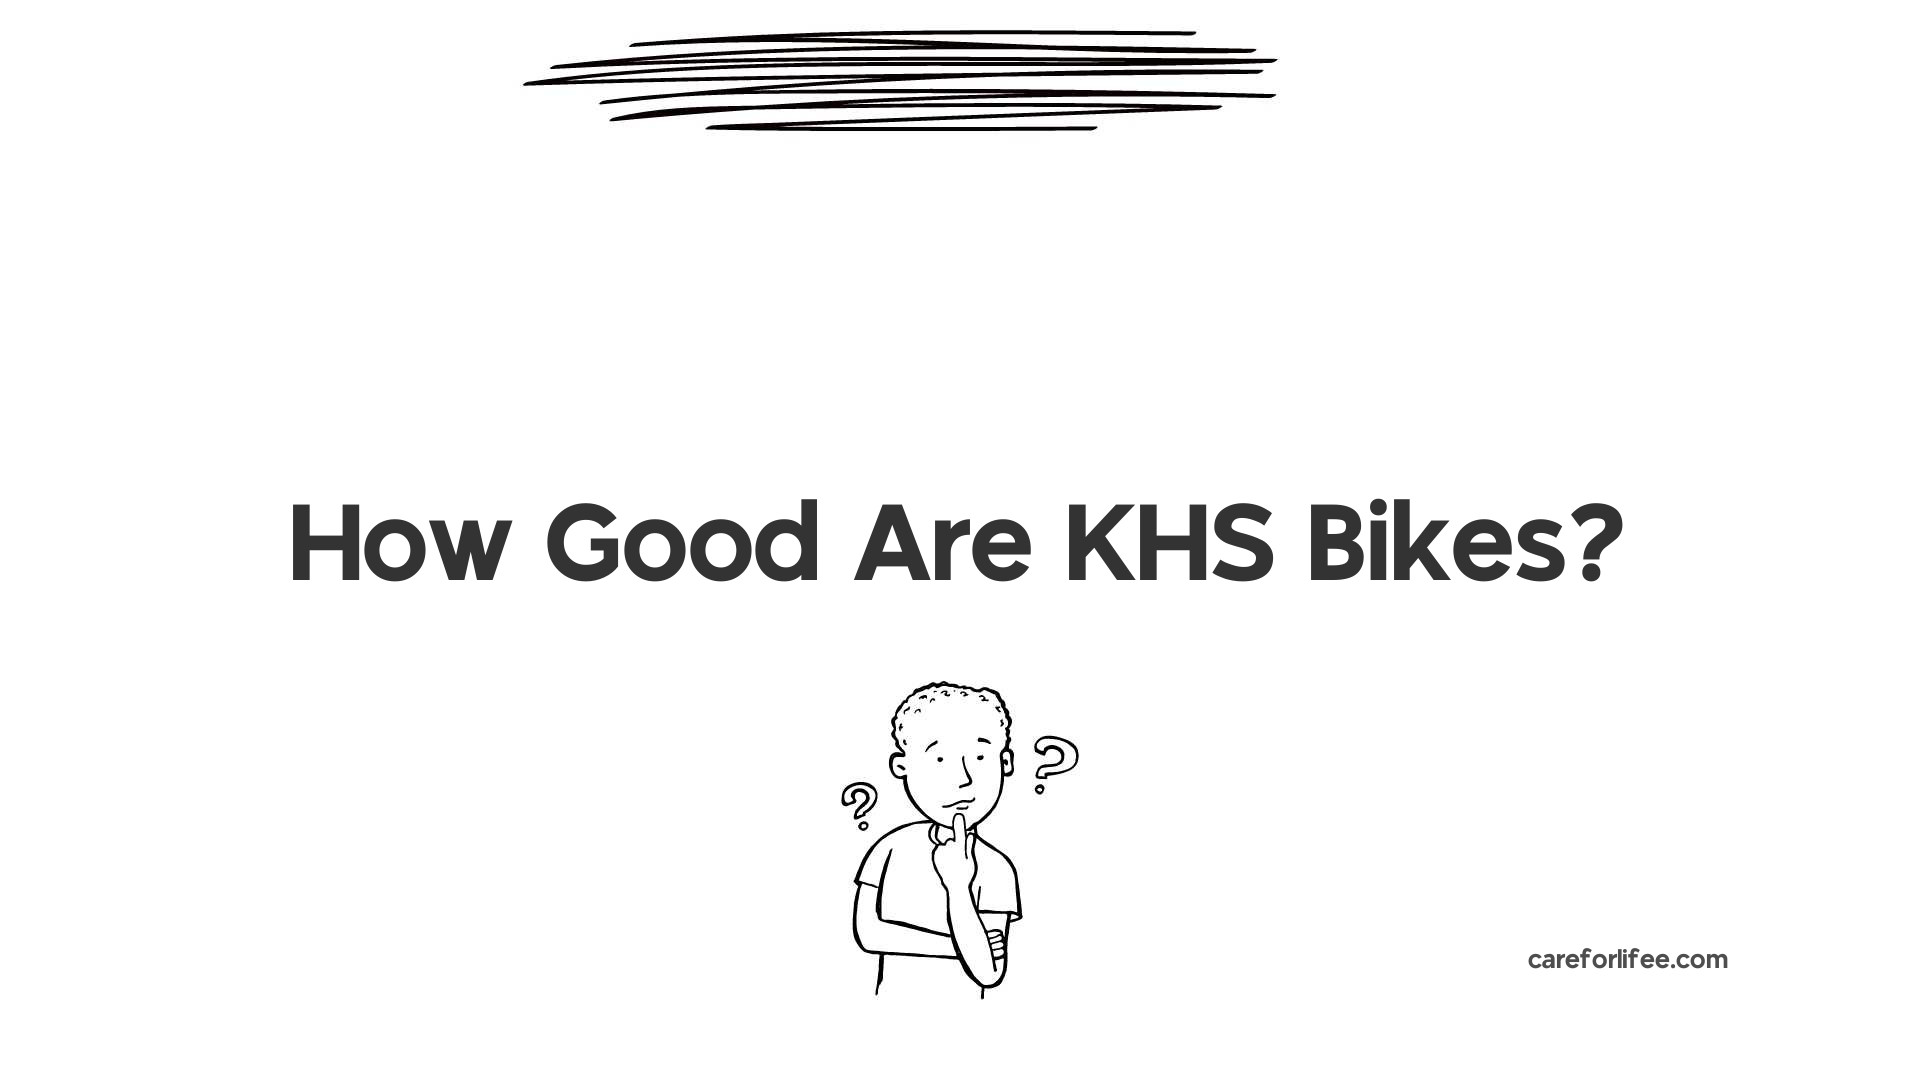 How Good Are KHS Bikes?